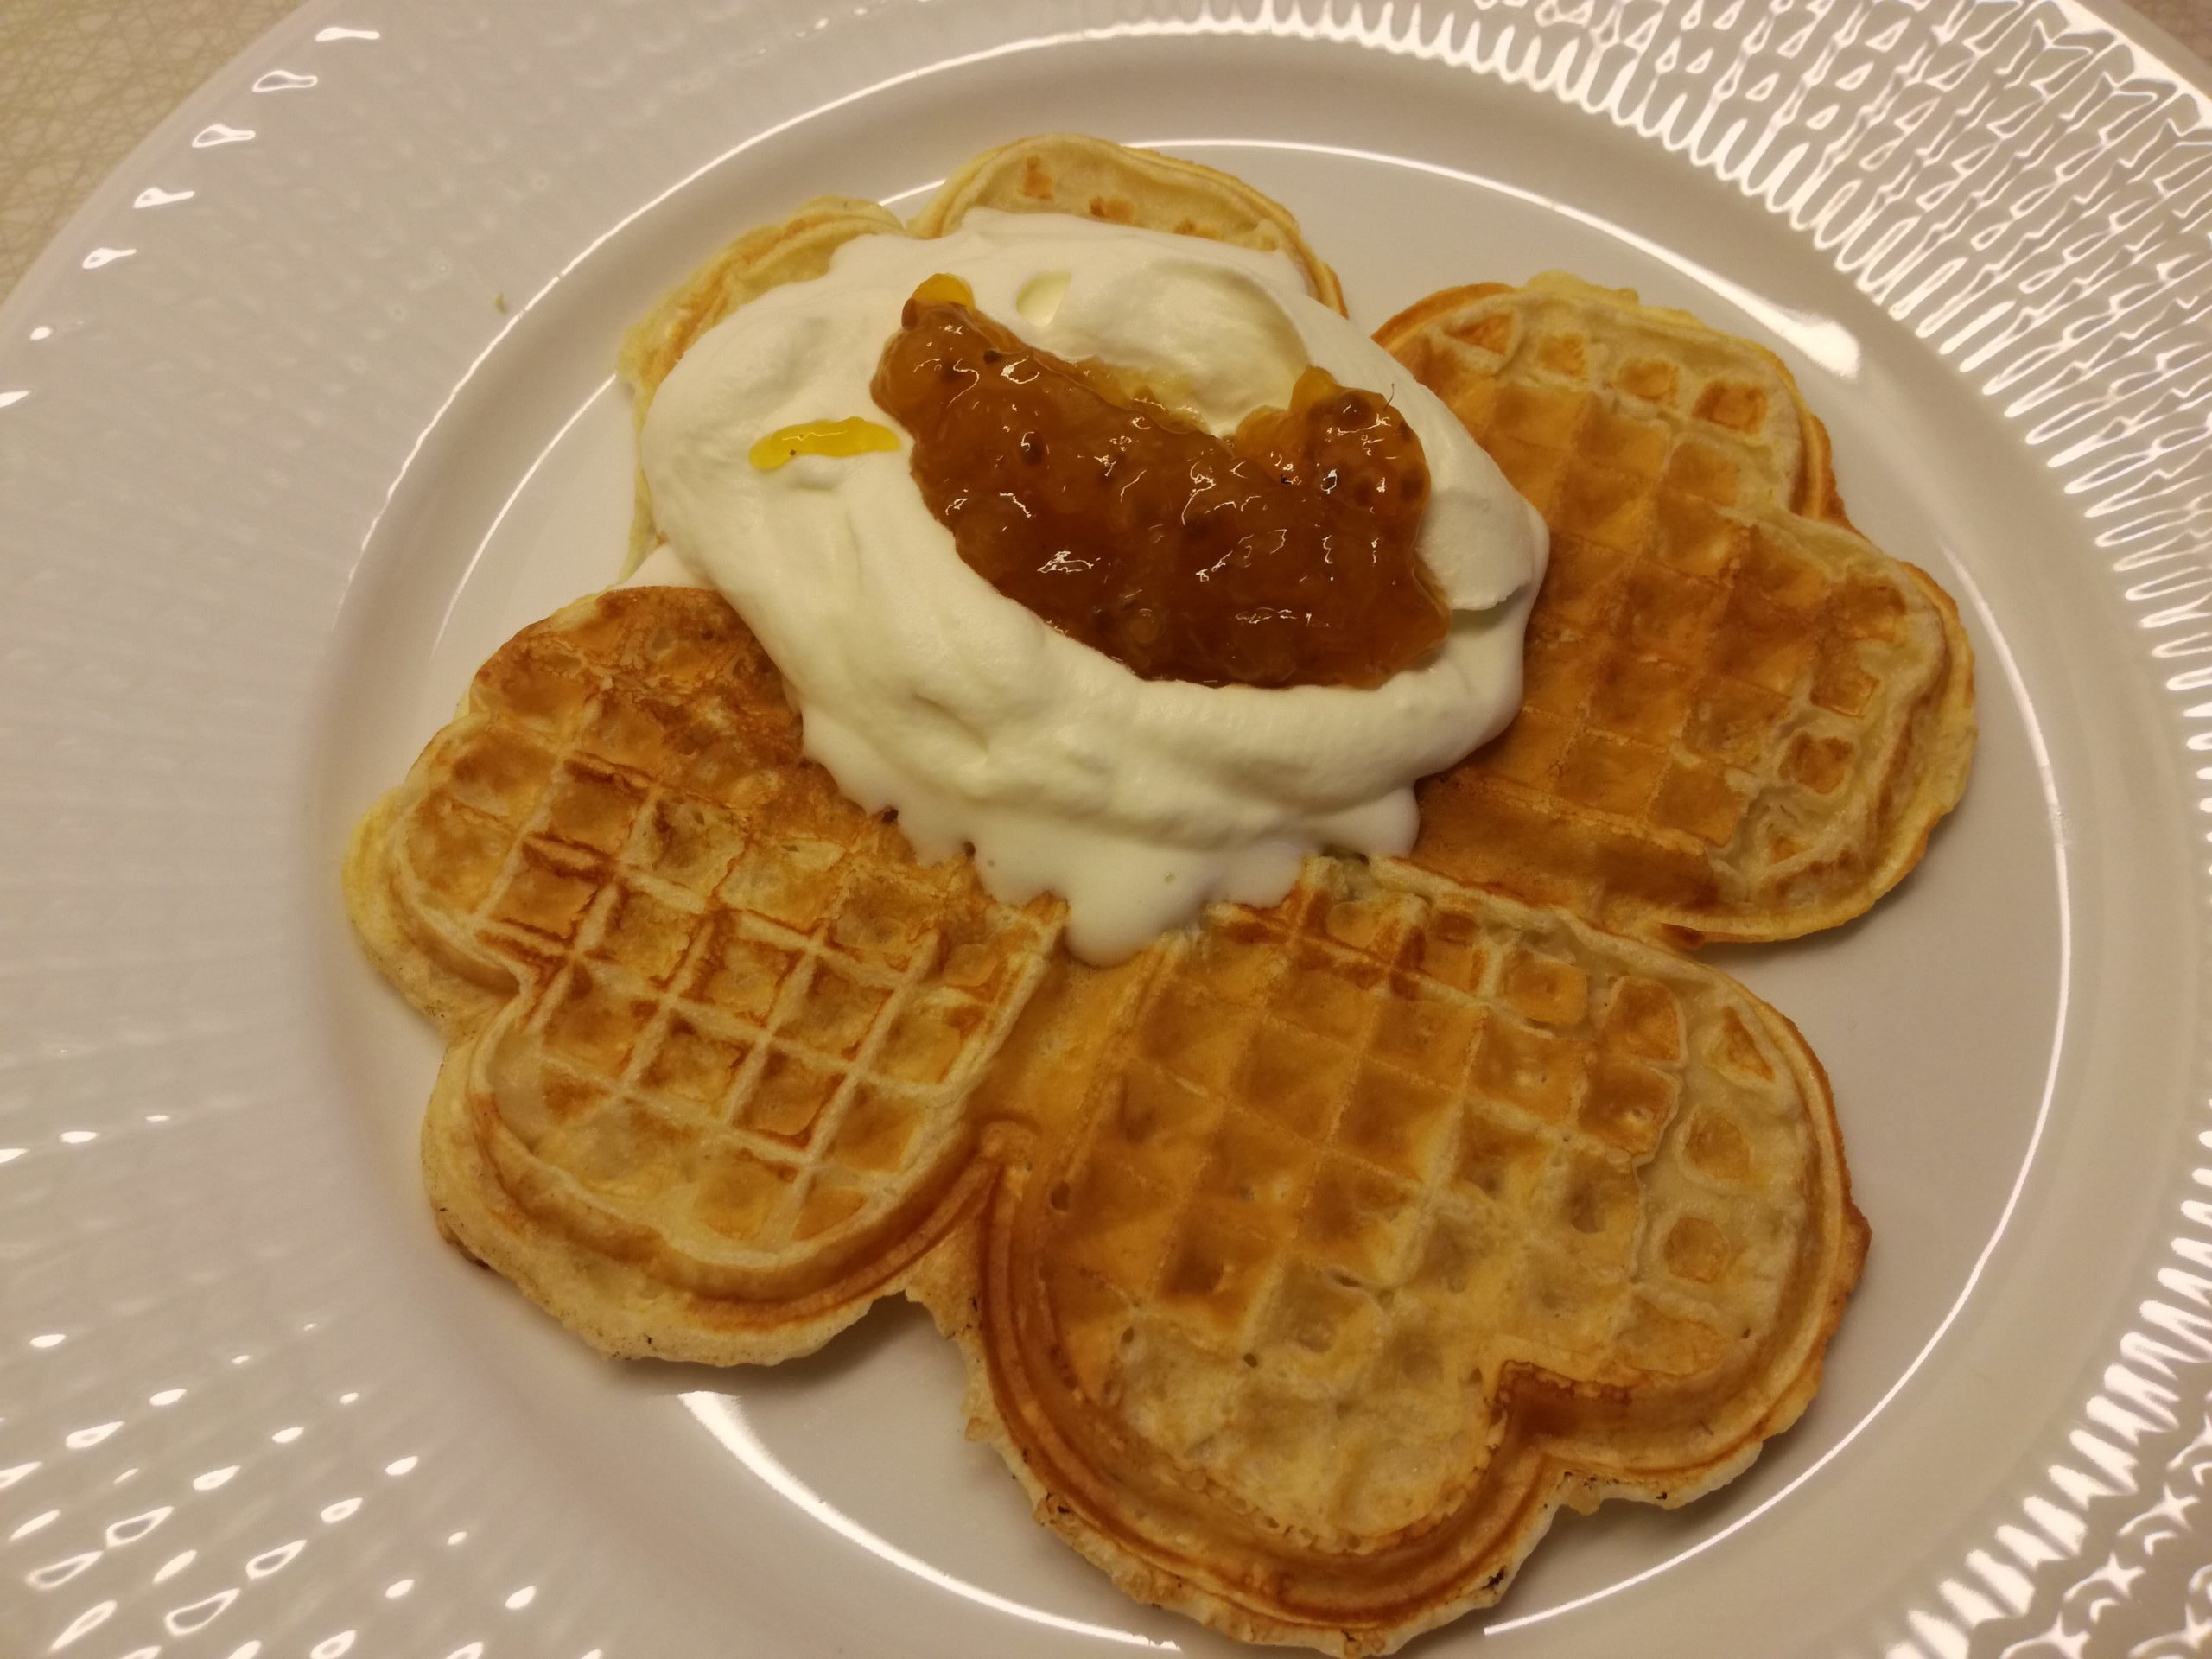 Waffle served with cream and cloudberries